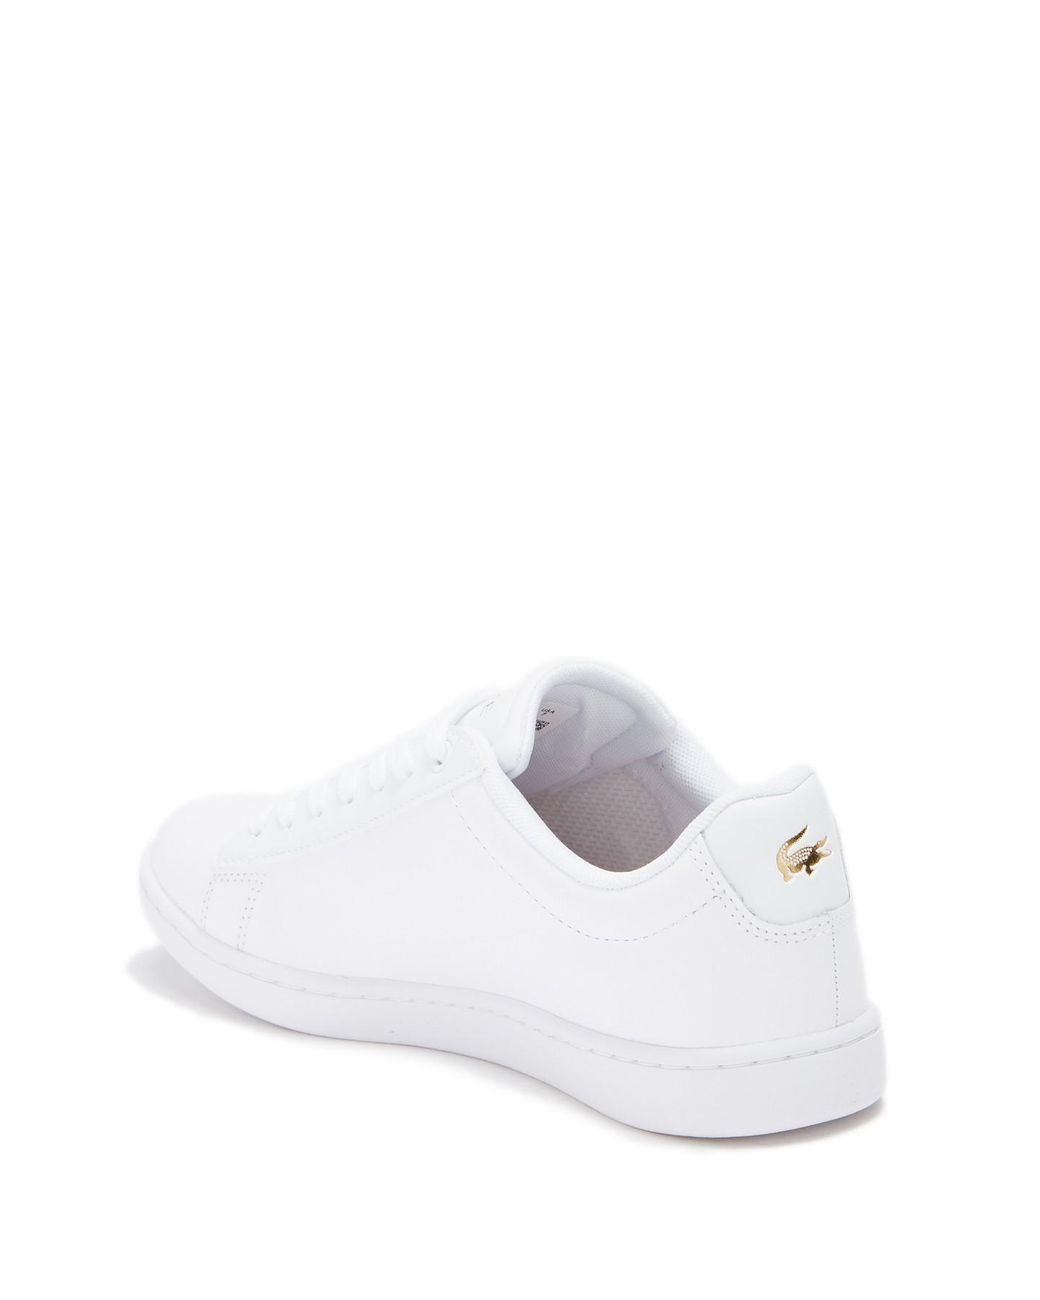 Lacoste Hydez 119 Leather Sneaker in White | Lyst